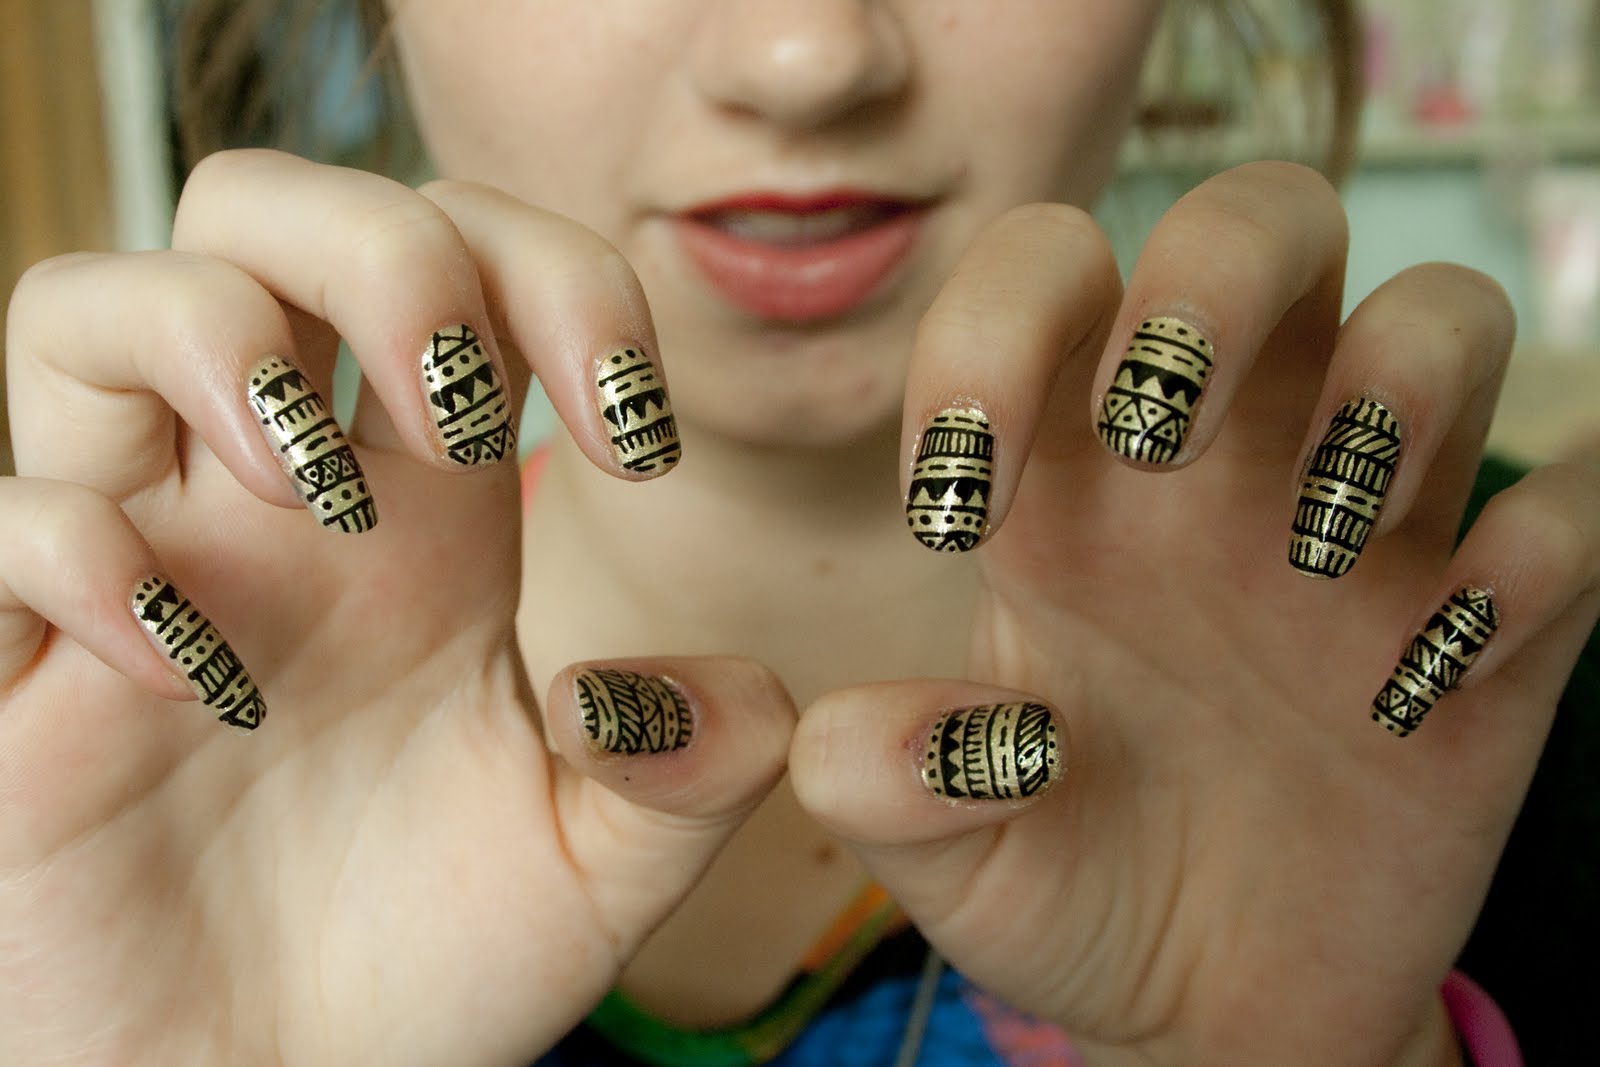 The girl with Black and Gold Aztec Nail Design.